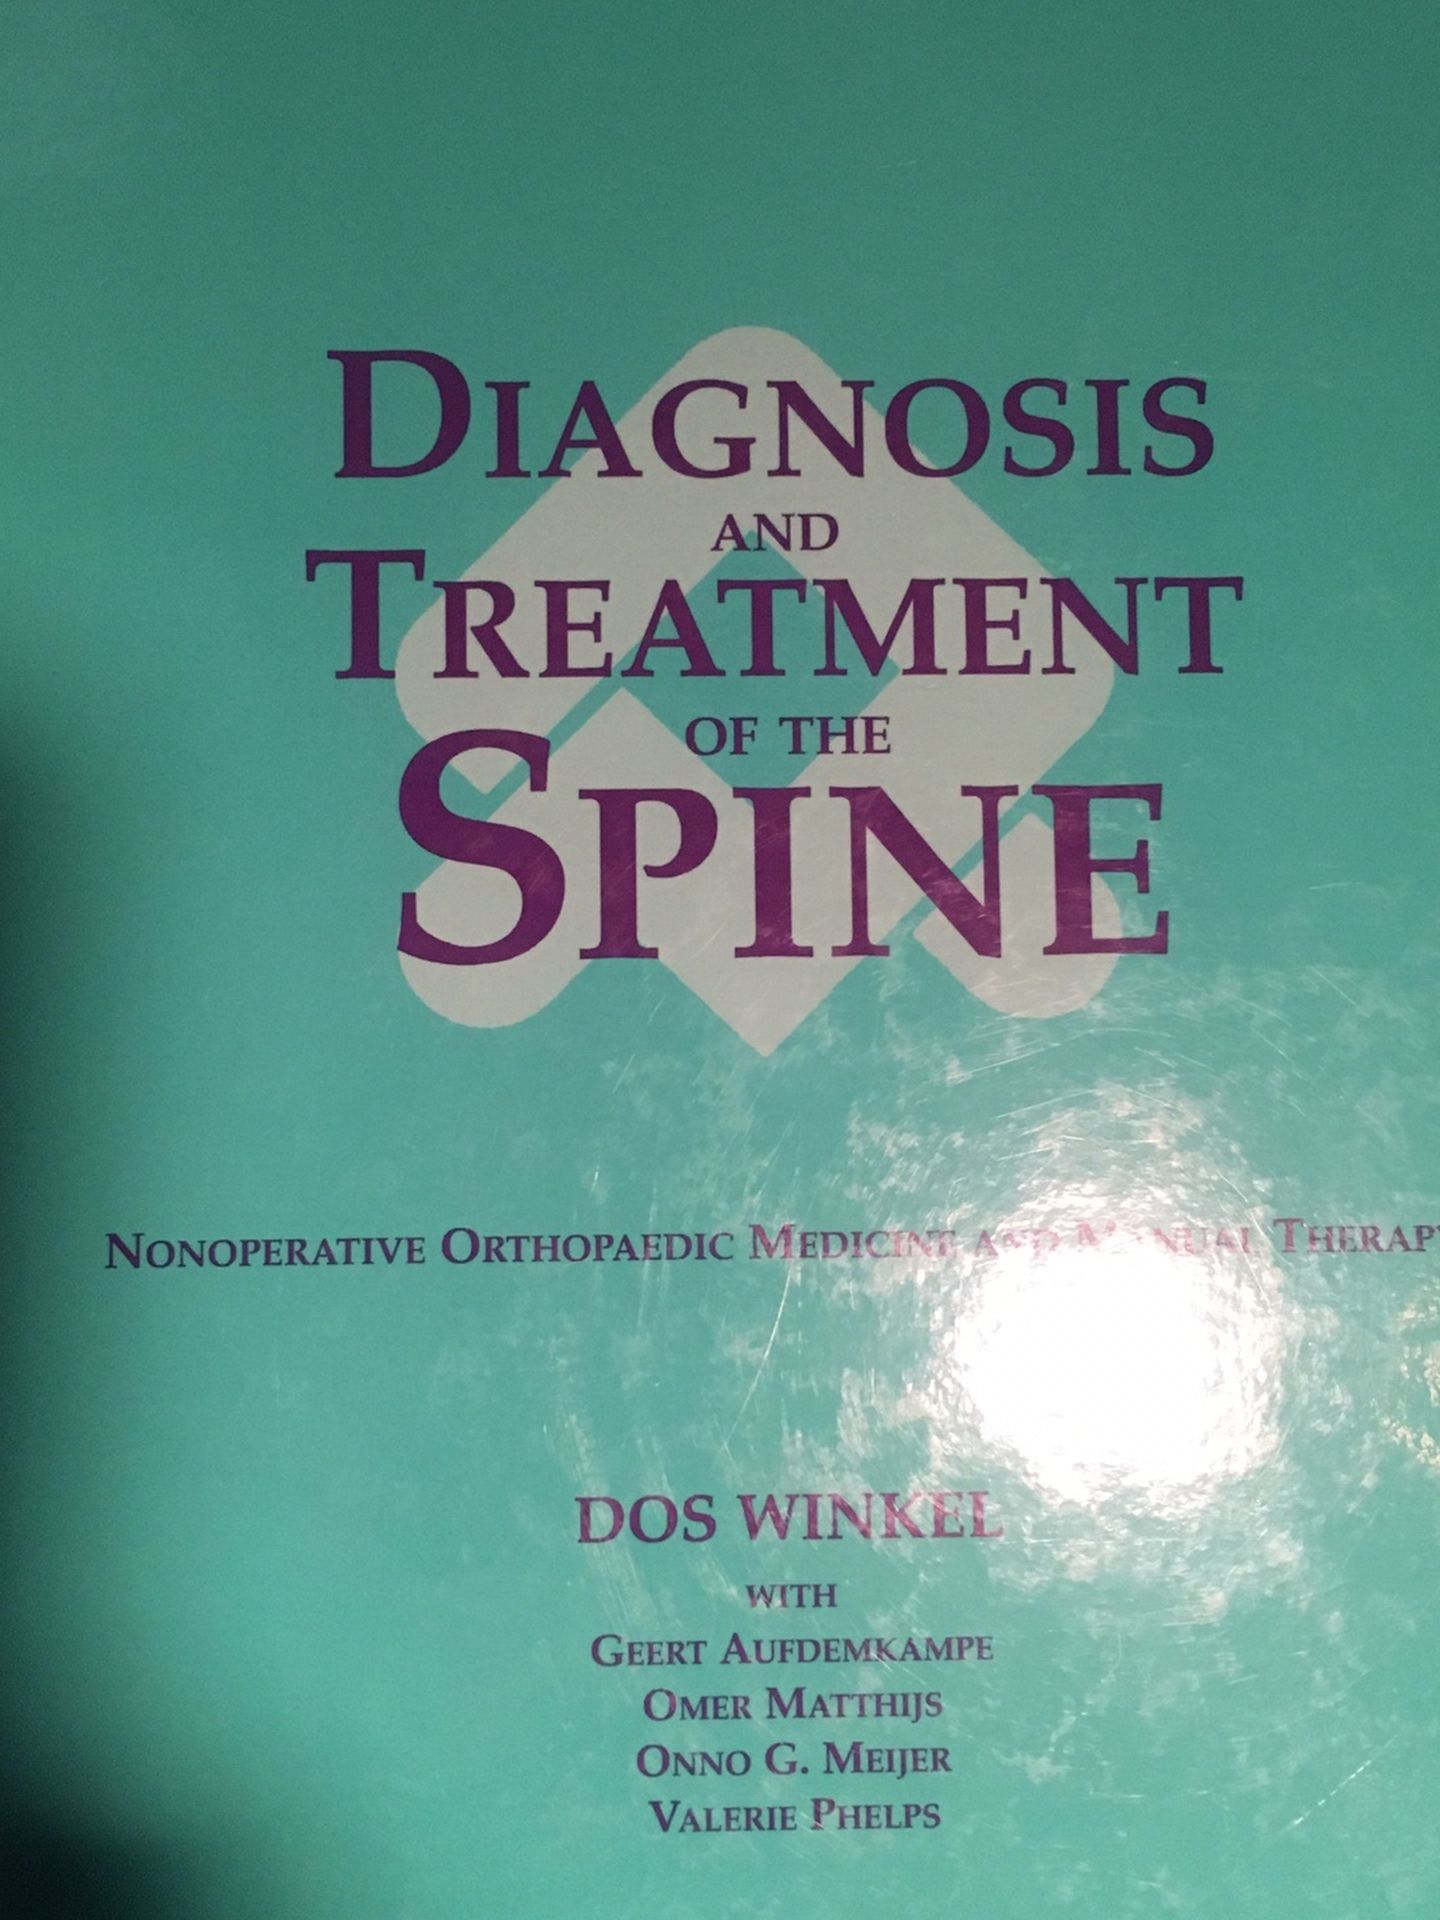 Book Diagnosis & Treatment of the Spine